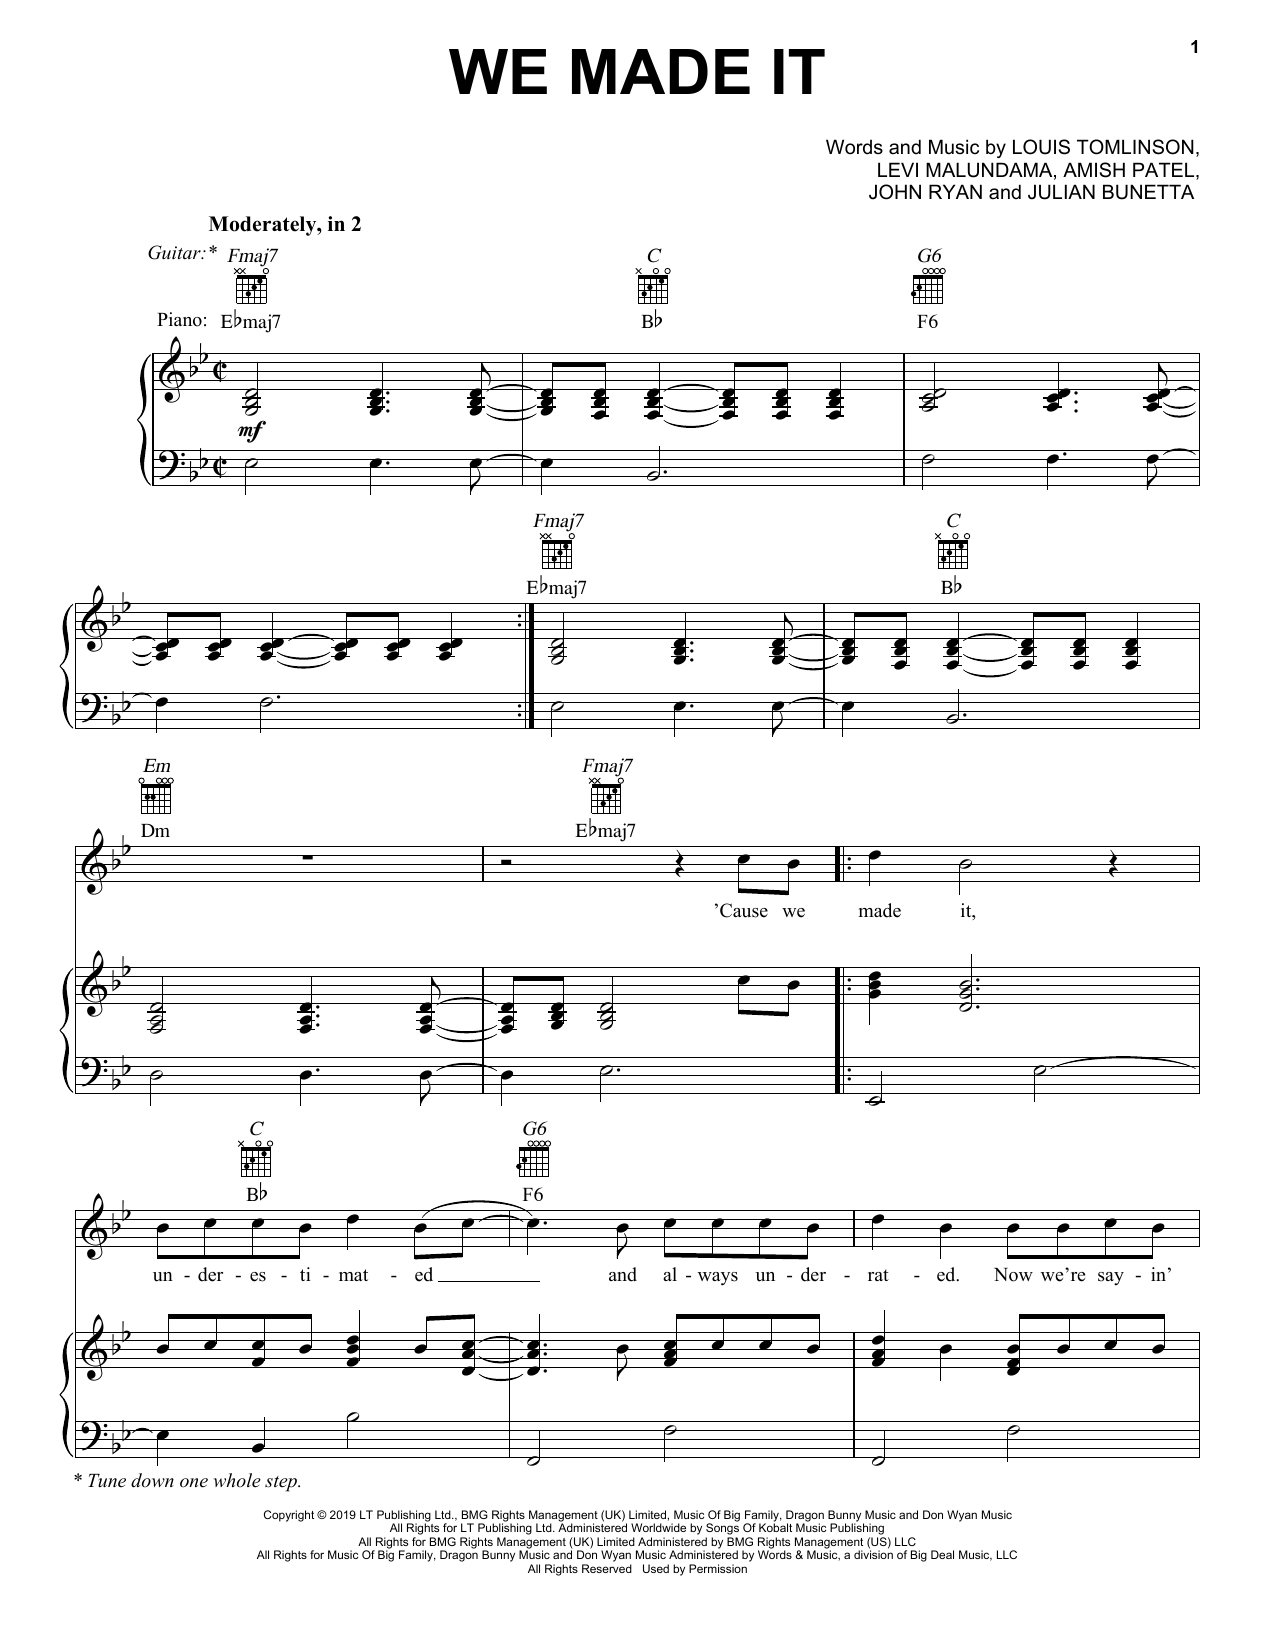 Two Of Us Sheet Music by Louis Tomlinson for Piano/Keyboard and Voice